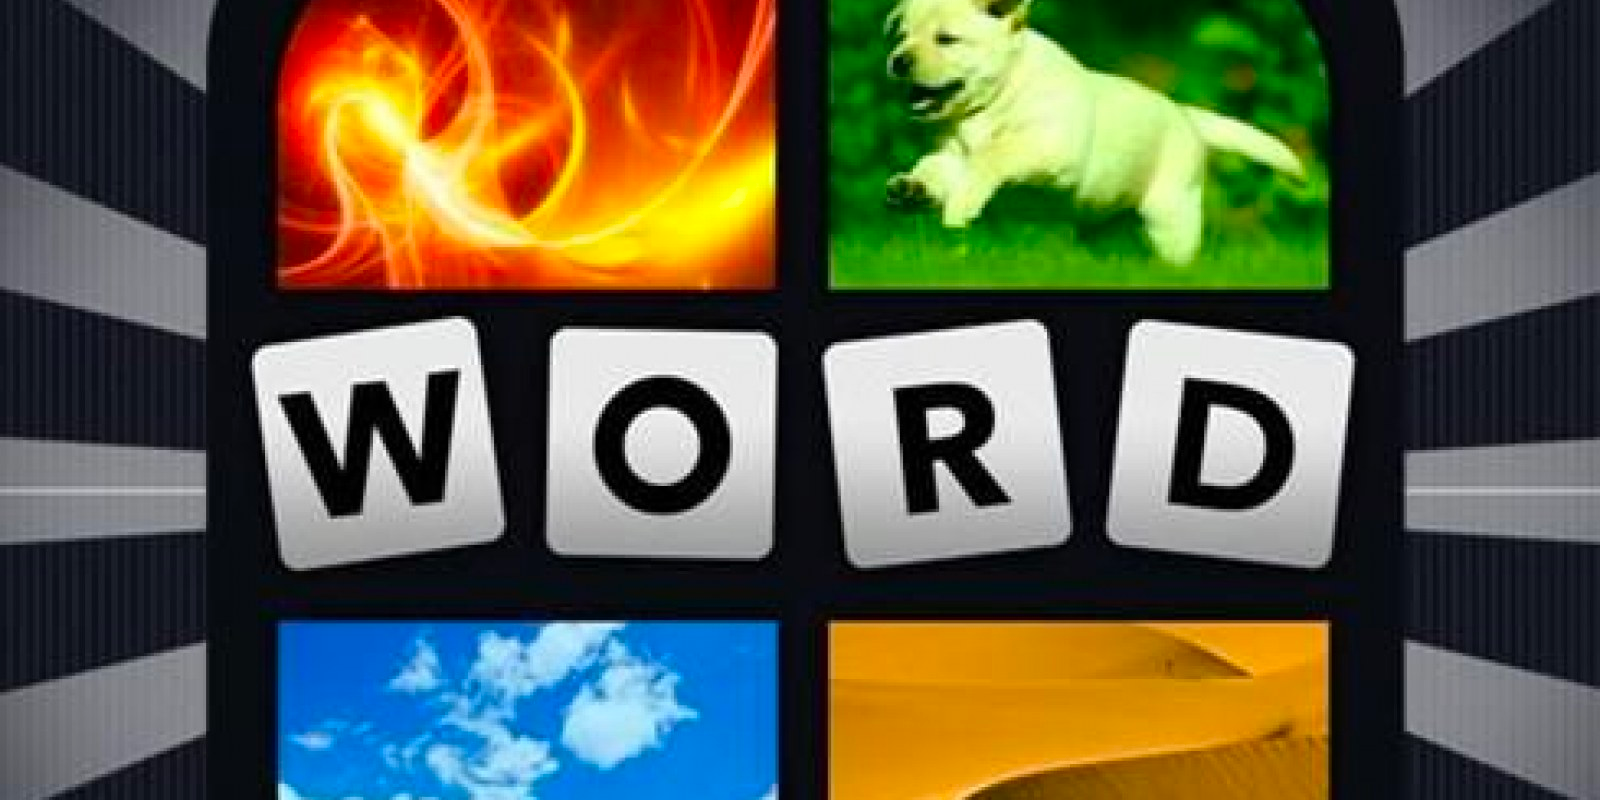 10 Other Word & Spelling Games To Play If You Love Wordle